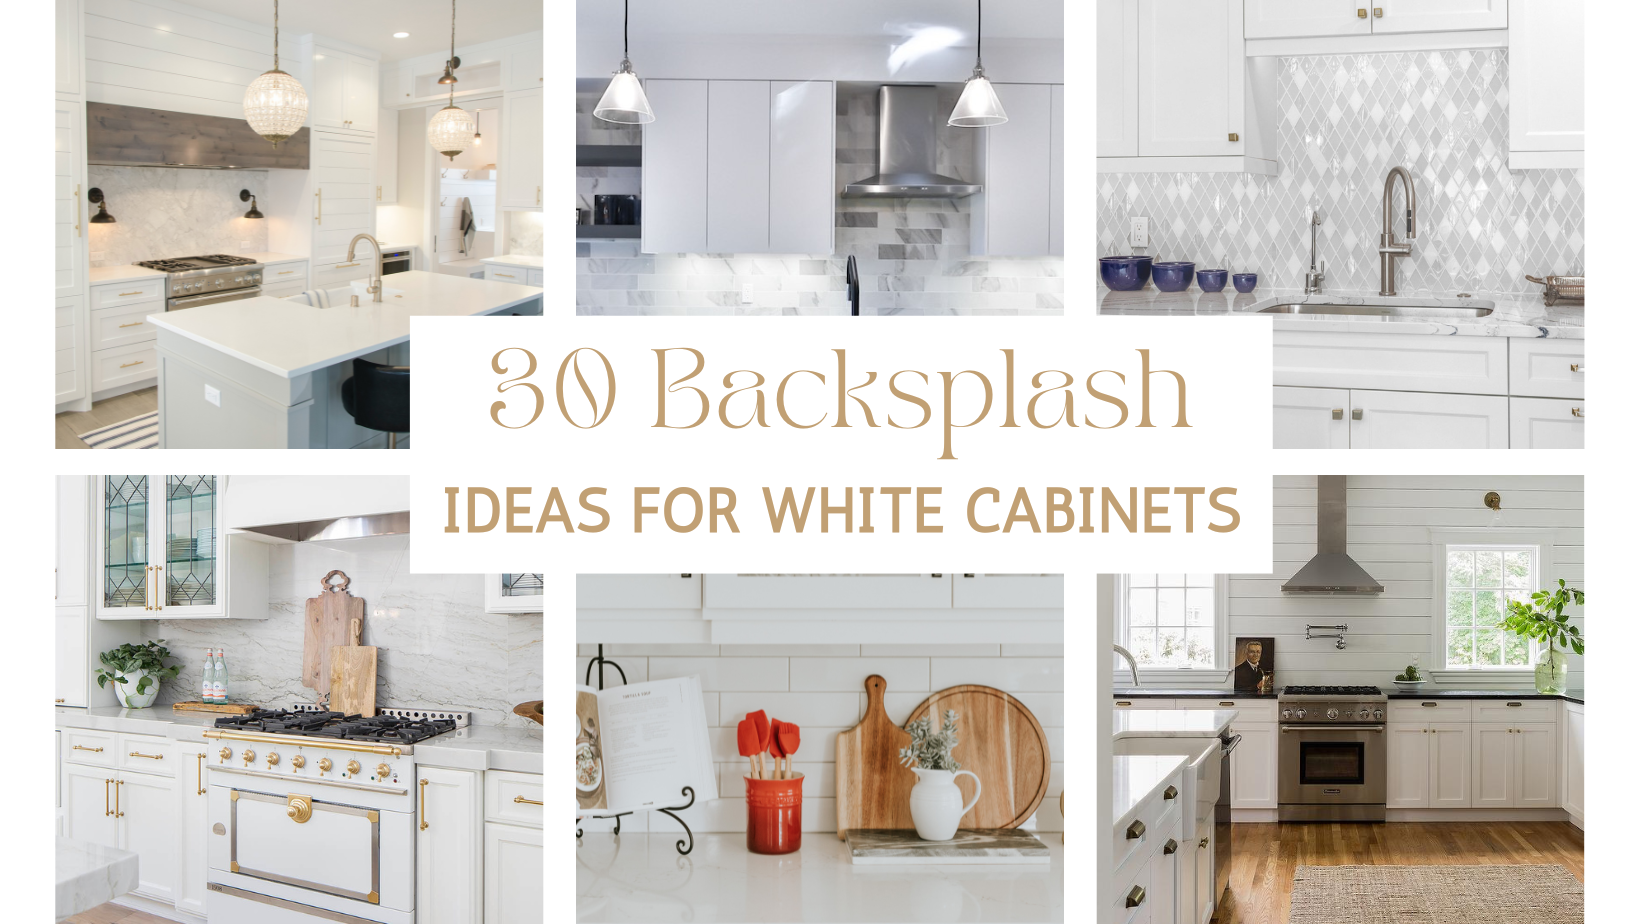 Top 11 Backsplash Ideas for White Cabinets and Granite Countertops